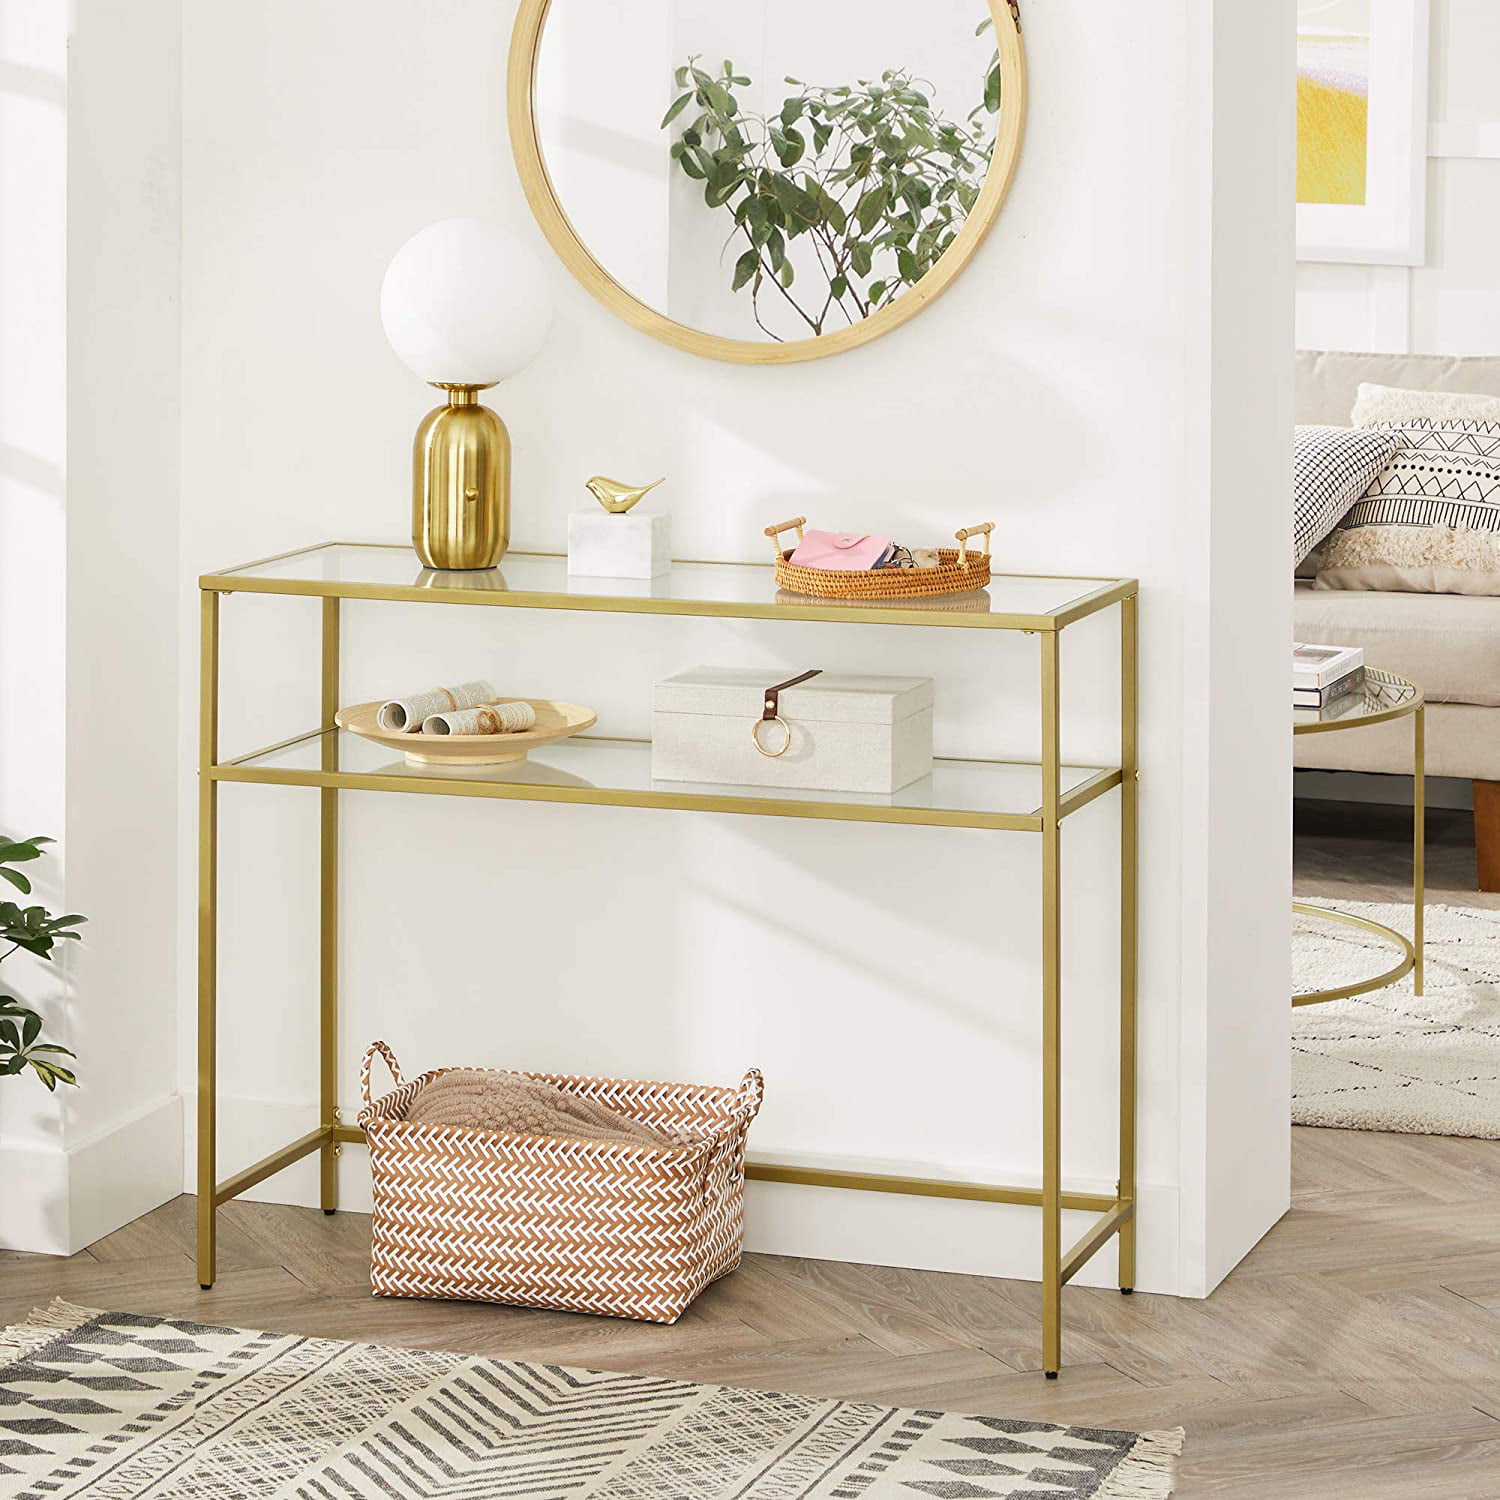 Modern Gold Console Table Tempered Glass Top Metal Frame 2 Shelves Storage Rack 